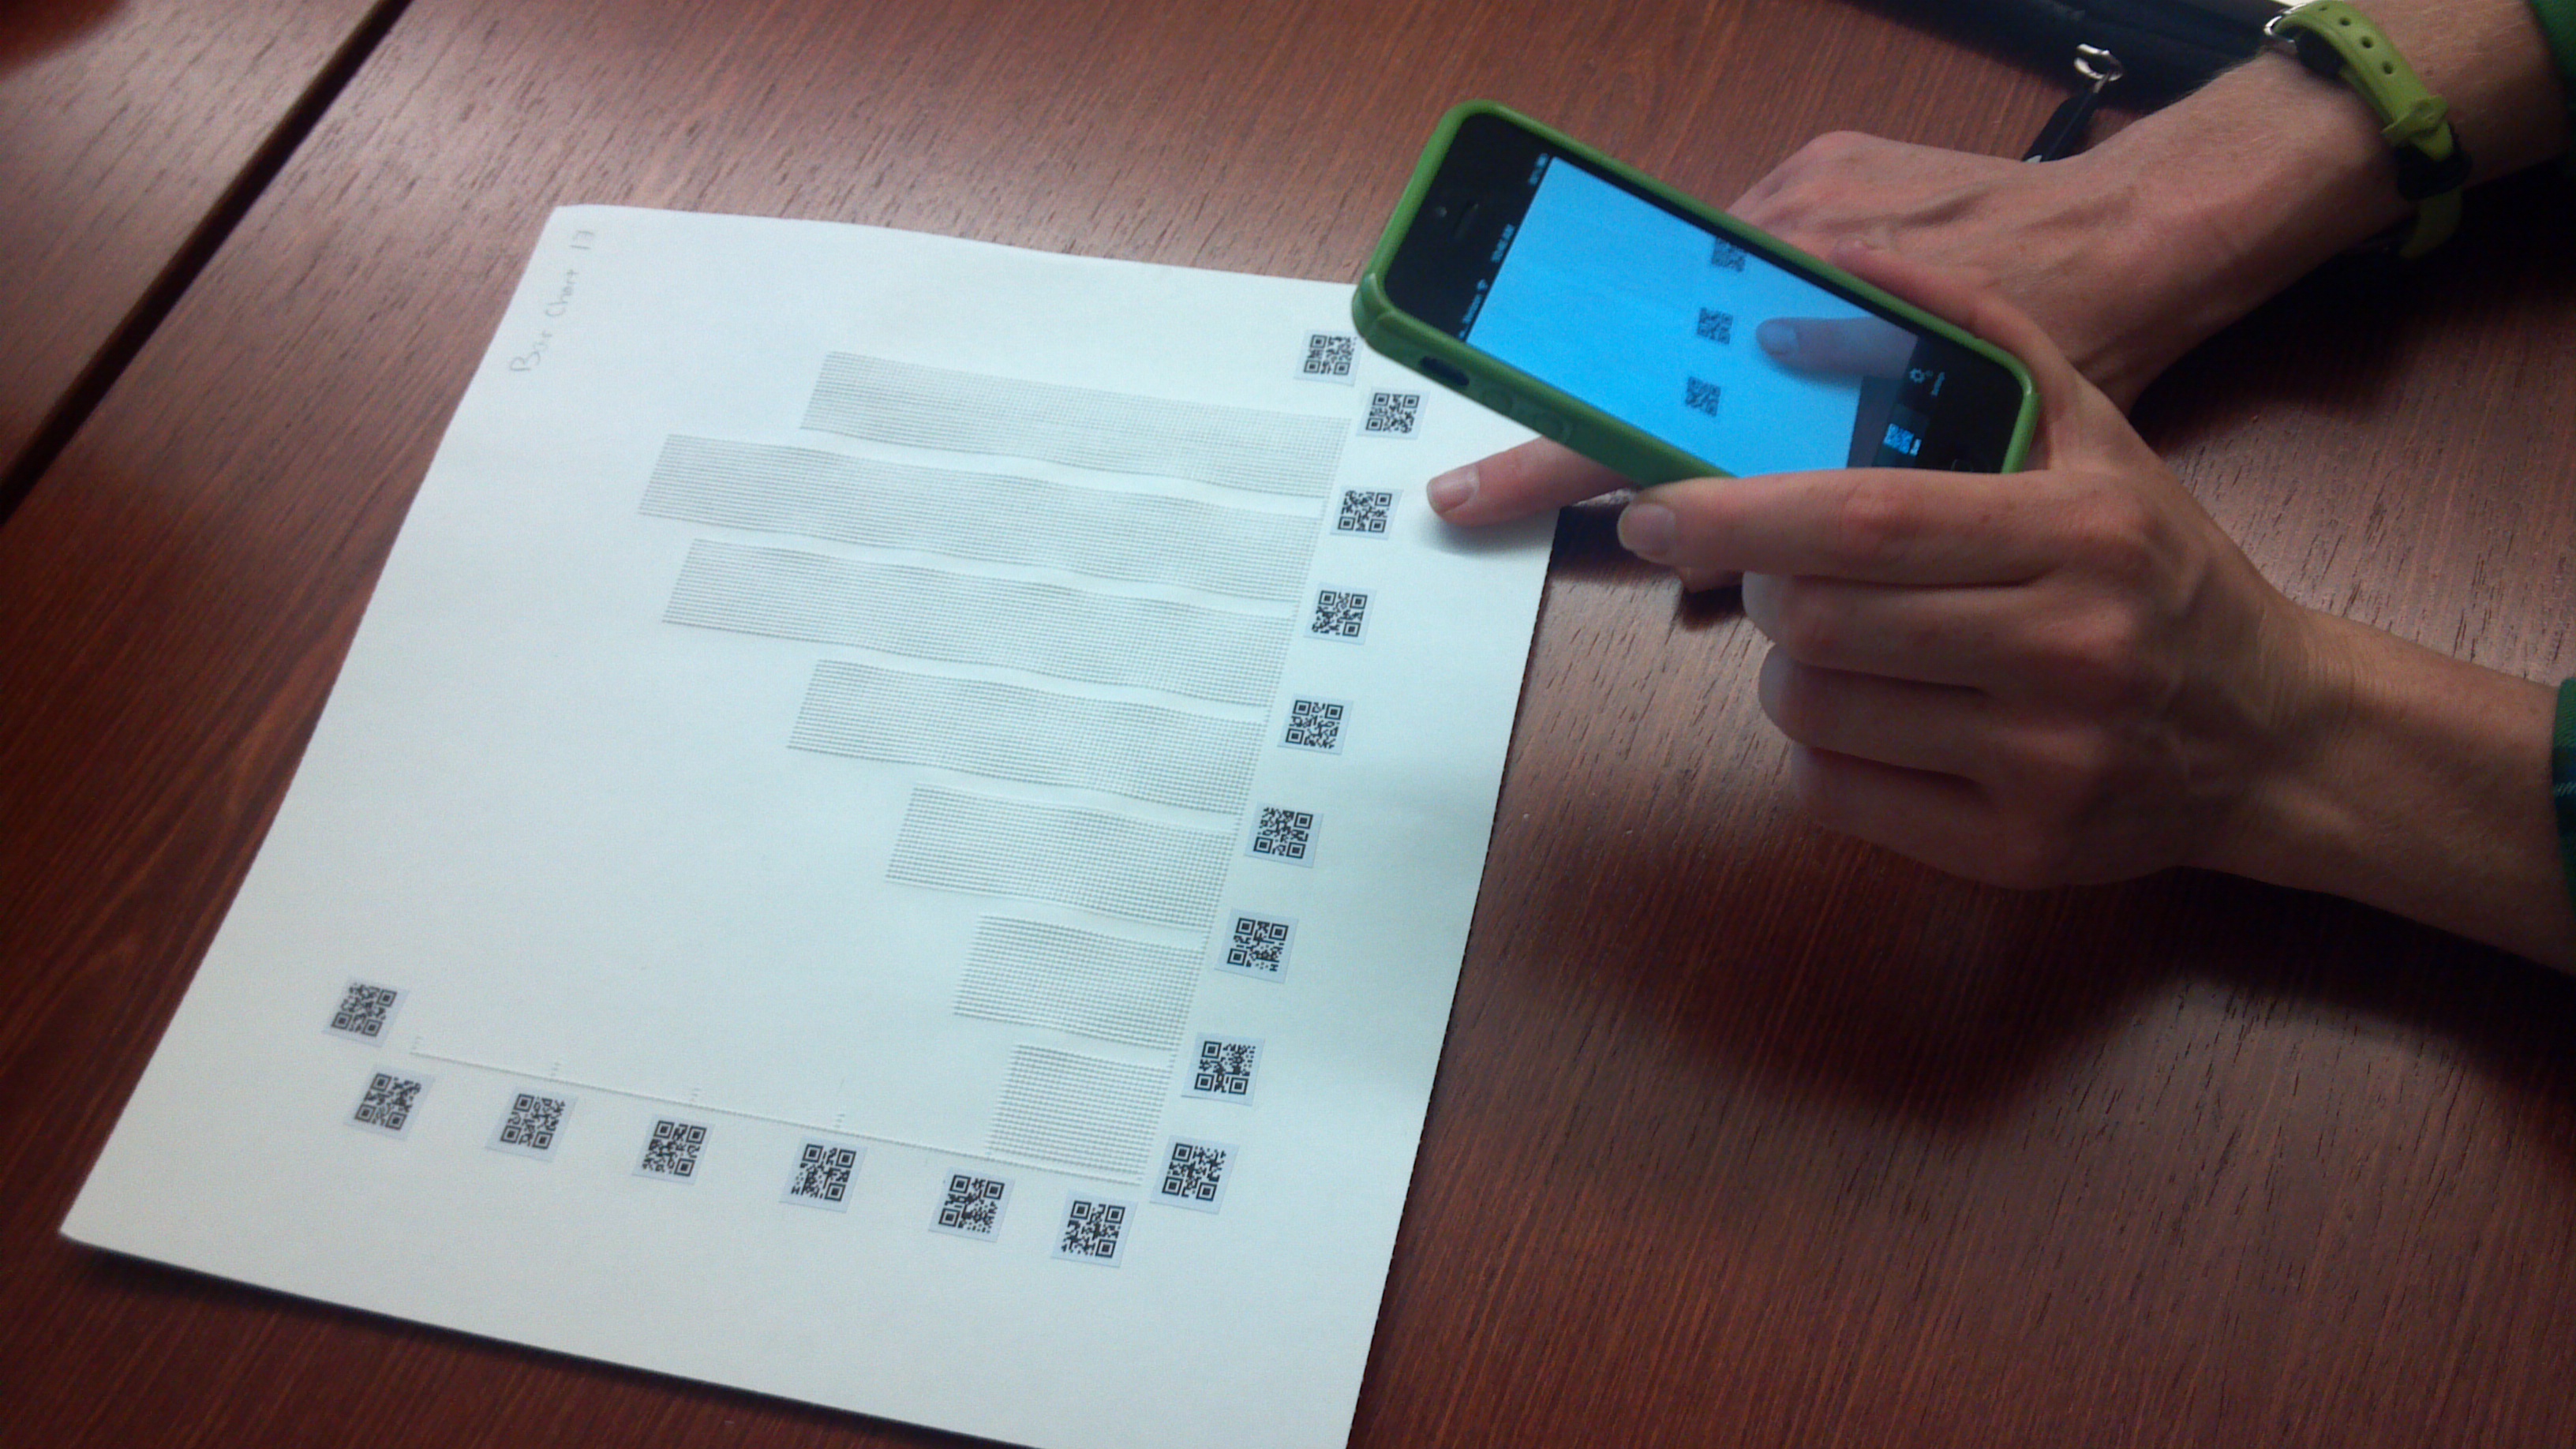 Tactile Graphic with finger pointing at a QR code